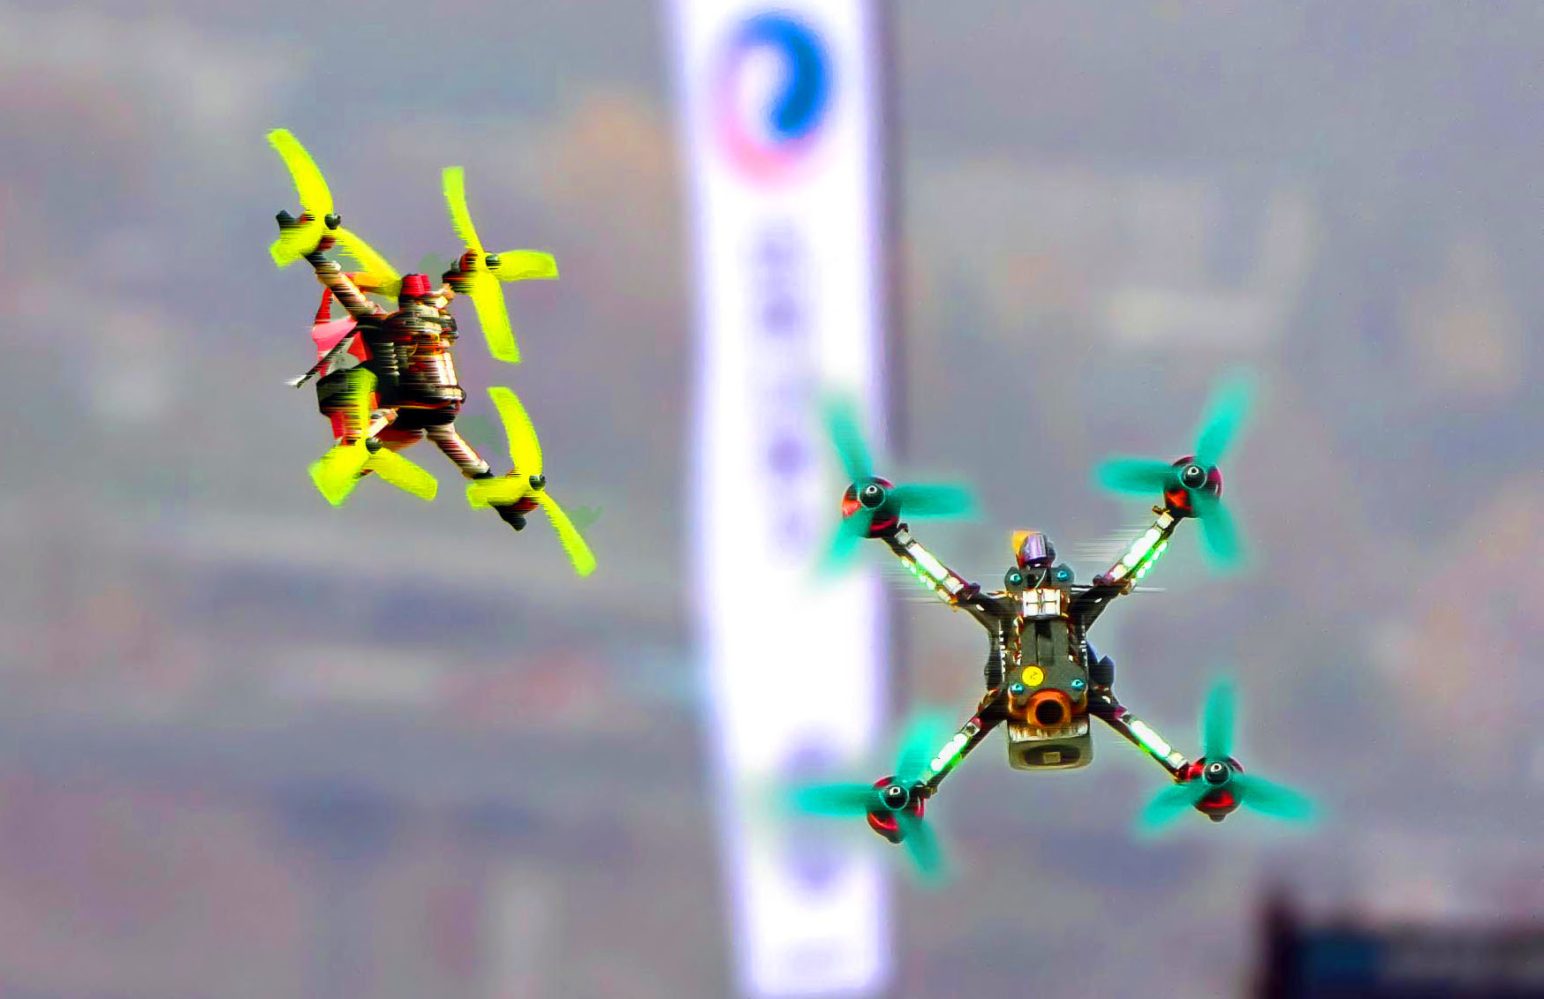 100K up for grabs in 2023 FAI World Drone Racing Championship